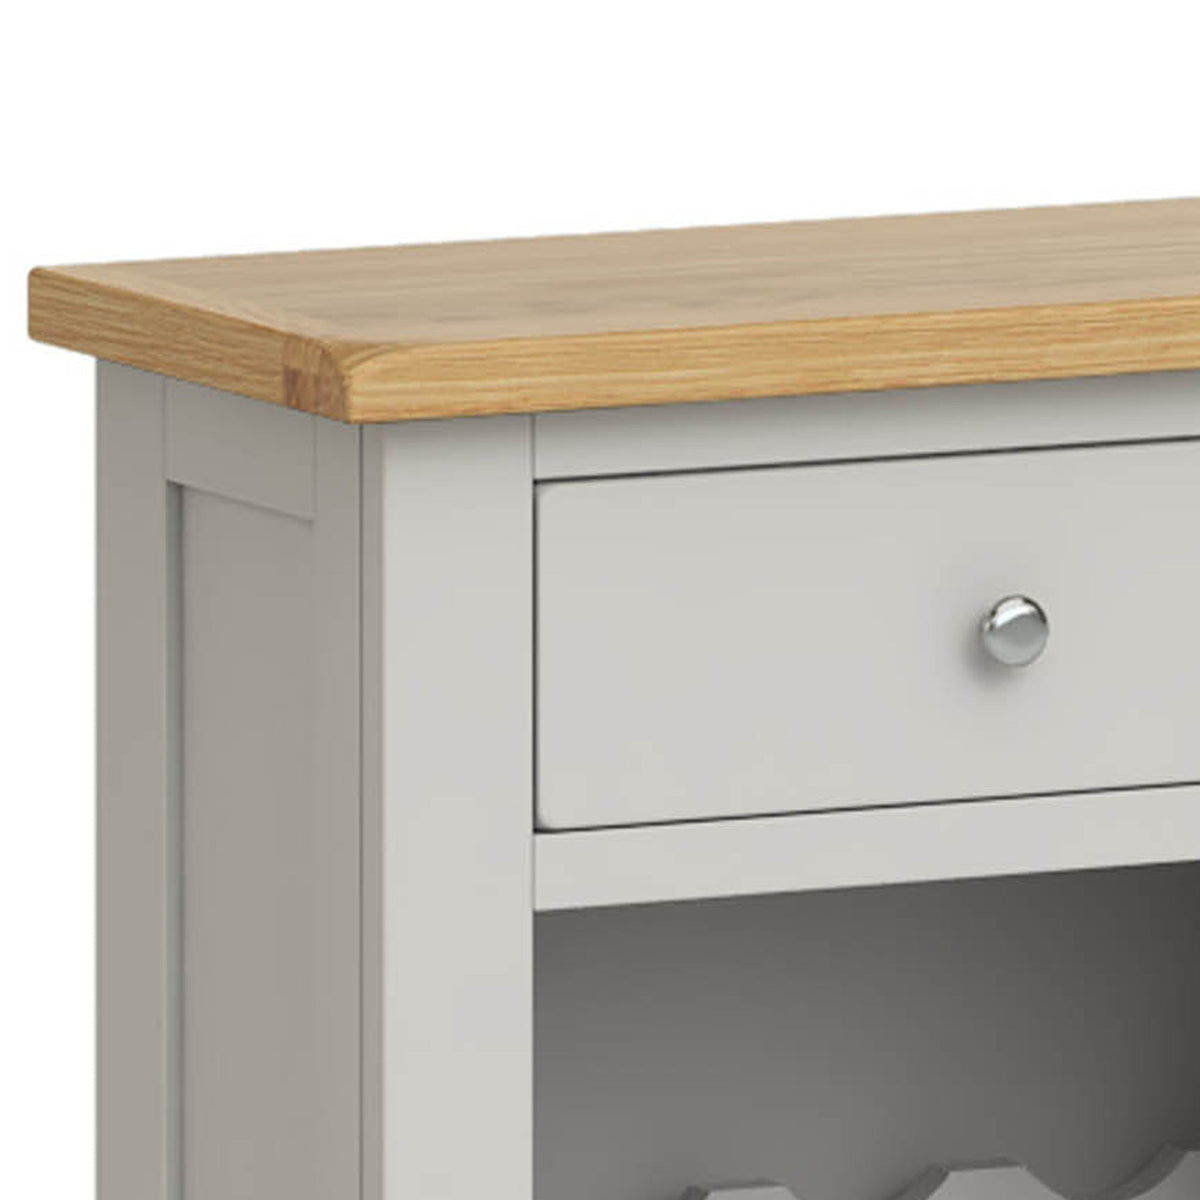 Lundy Grey Wine Rack Cabinet - Close Up of Drawer